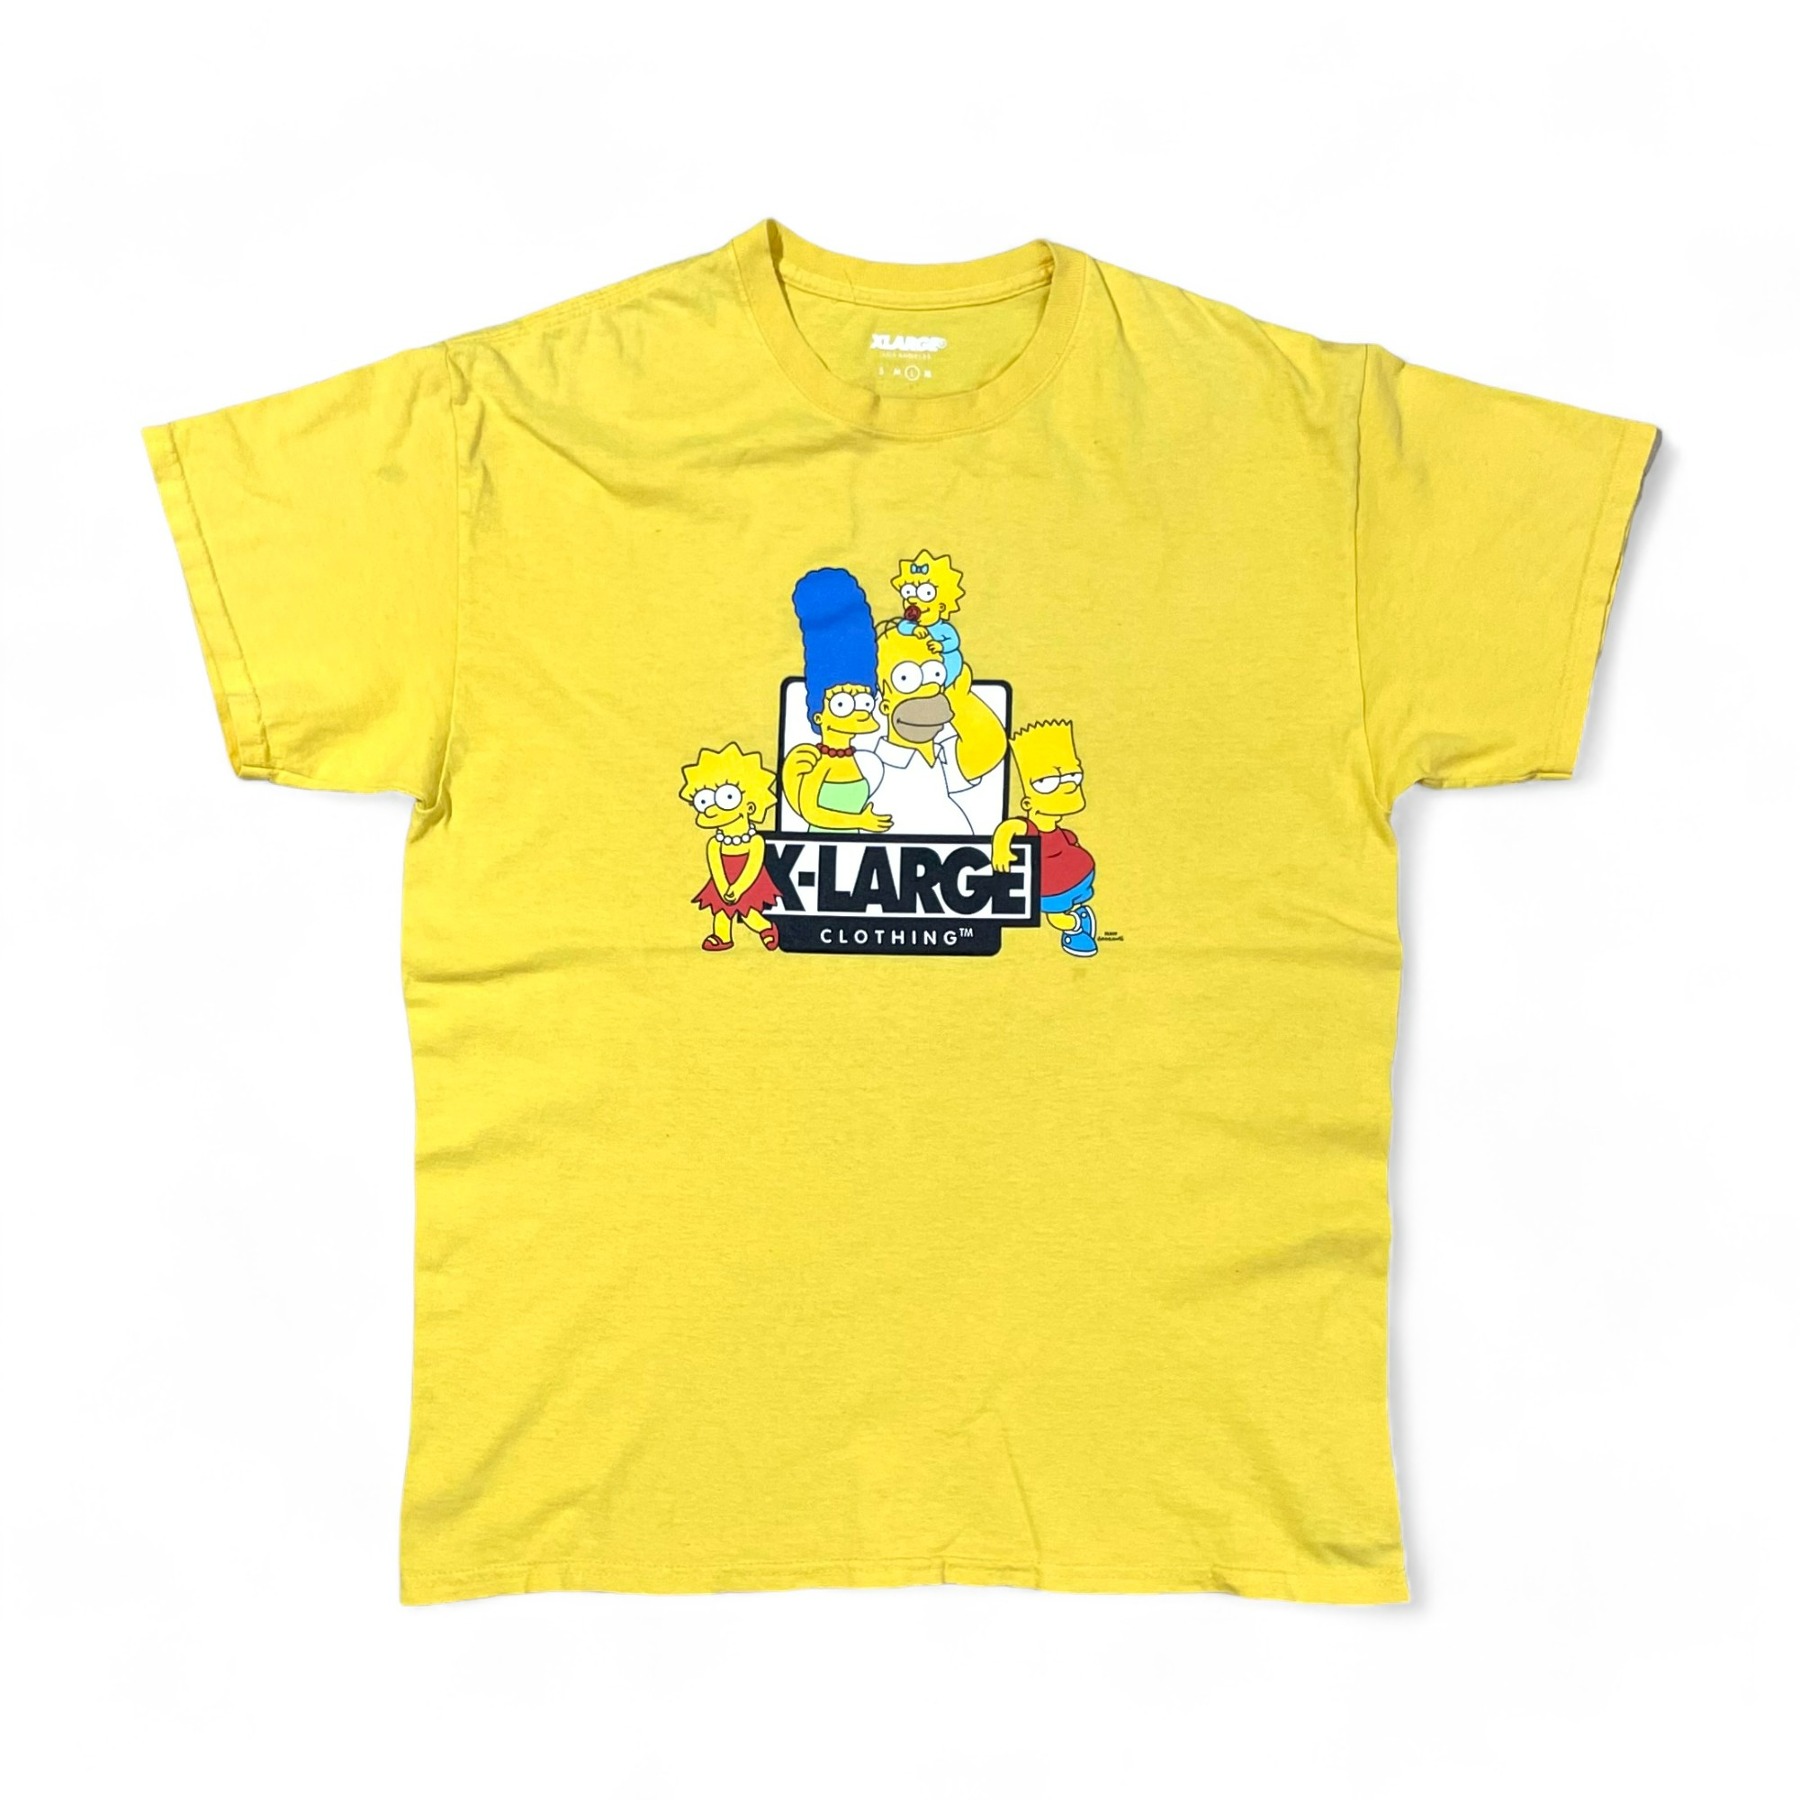 2018 X-LARGE x The Simpsons Tee - L